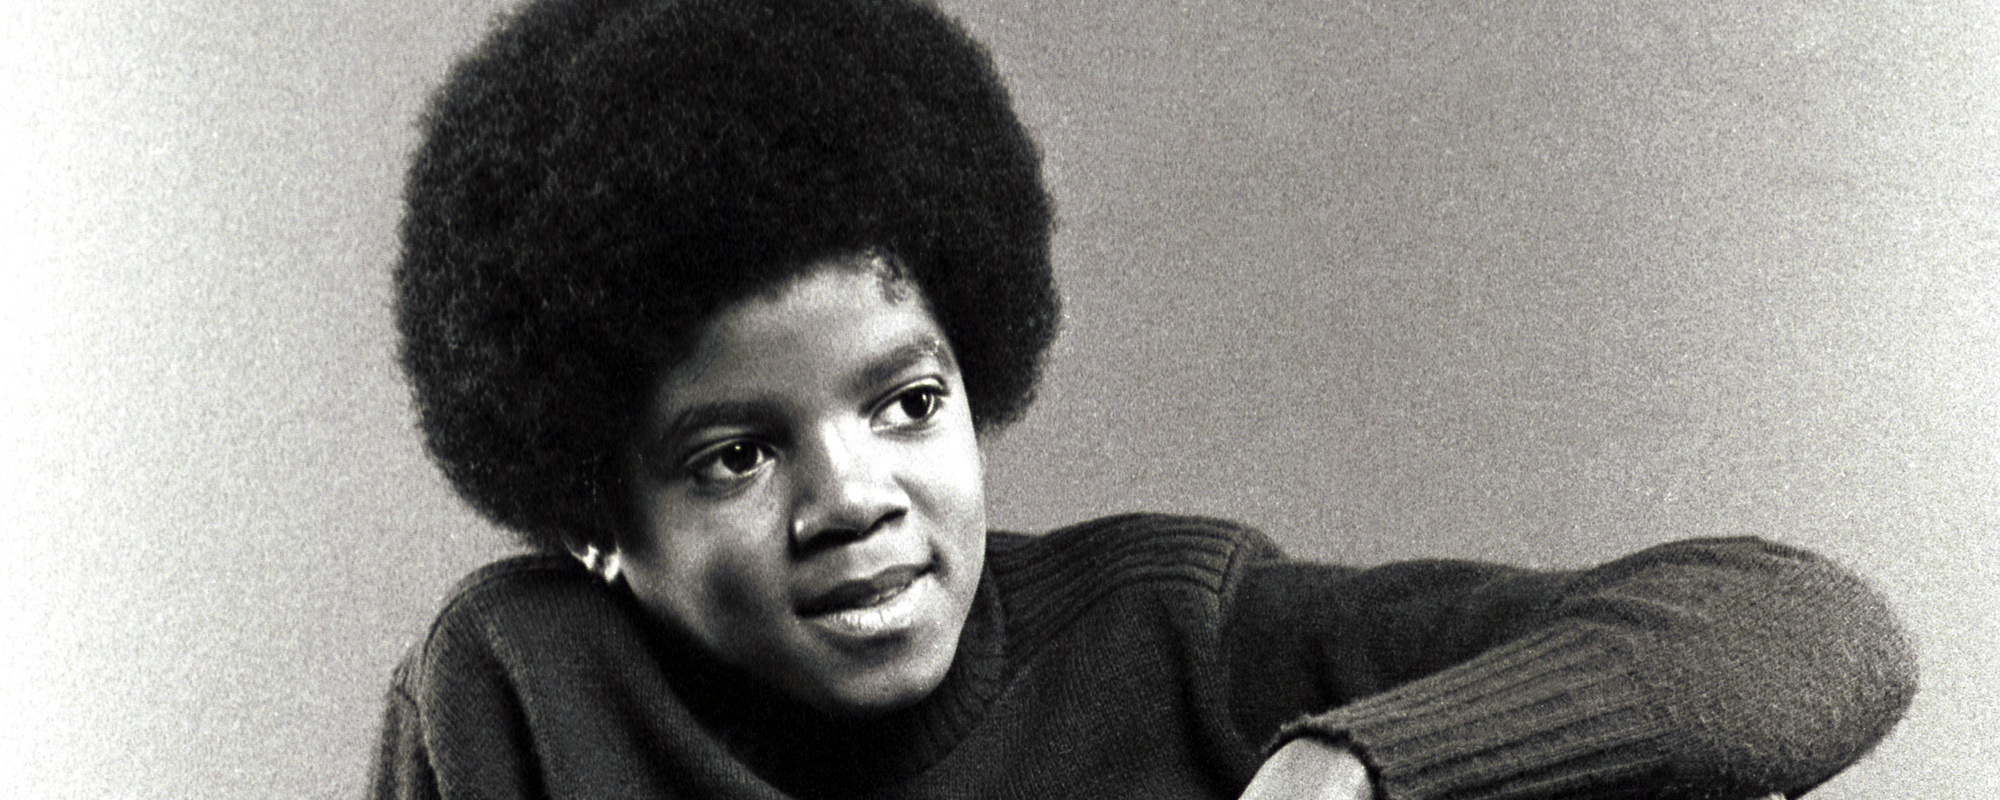 Michael Jackson’s First-Ever Studio Recording is Getting a Limited Release